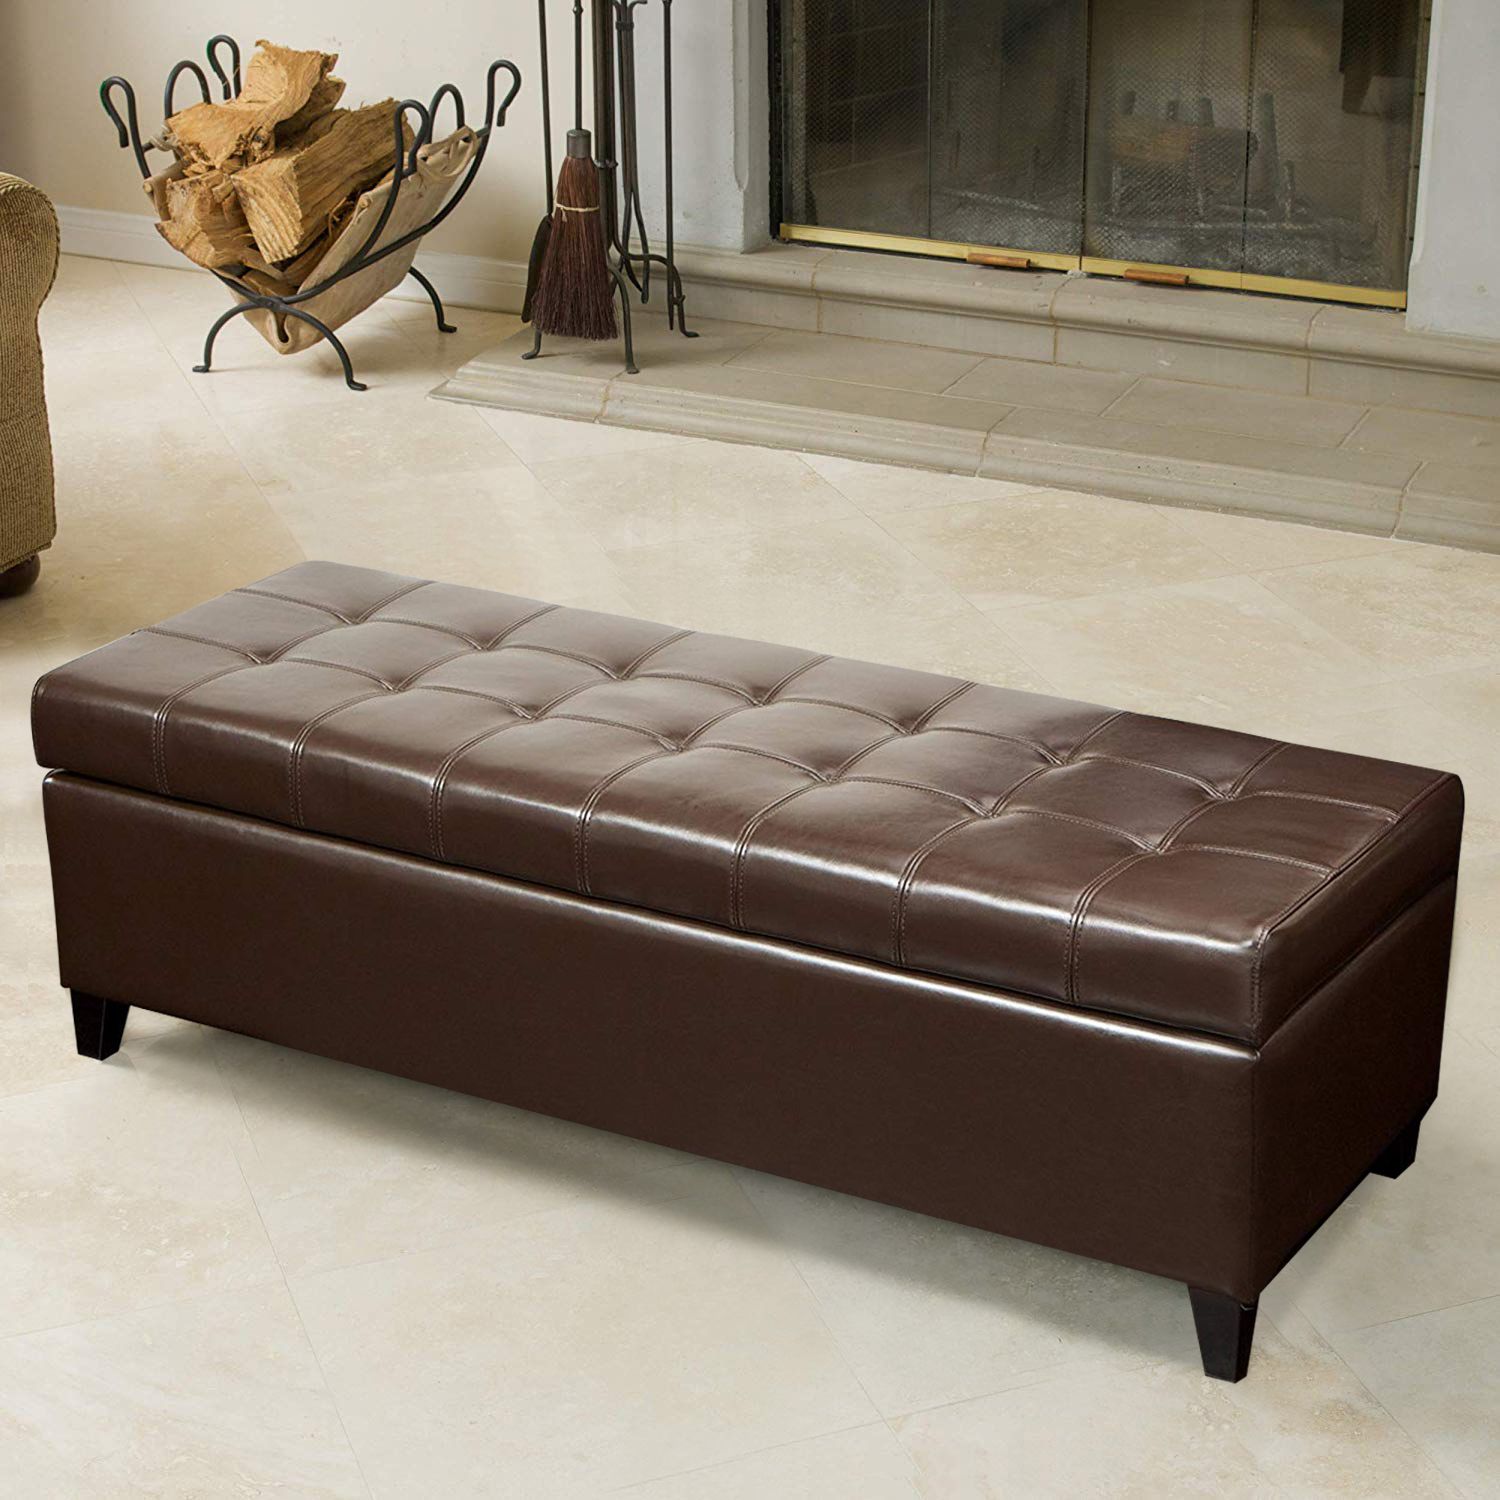 Best And Newest Brown Tufted Pouf Ottomans Within Joveco Leather Accents Rectangular Tufted Storage Ottoman Footstool (View 5 of 10)